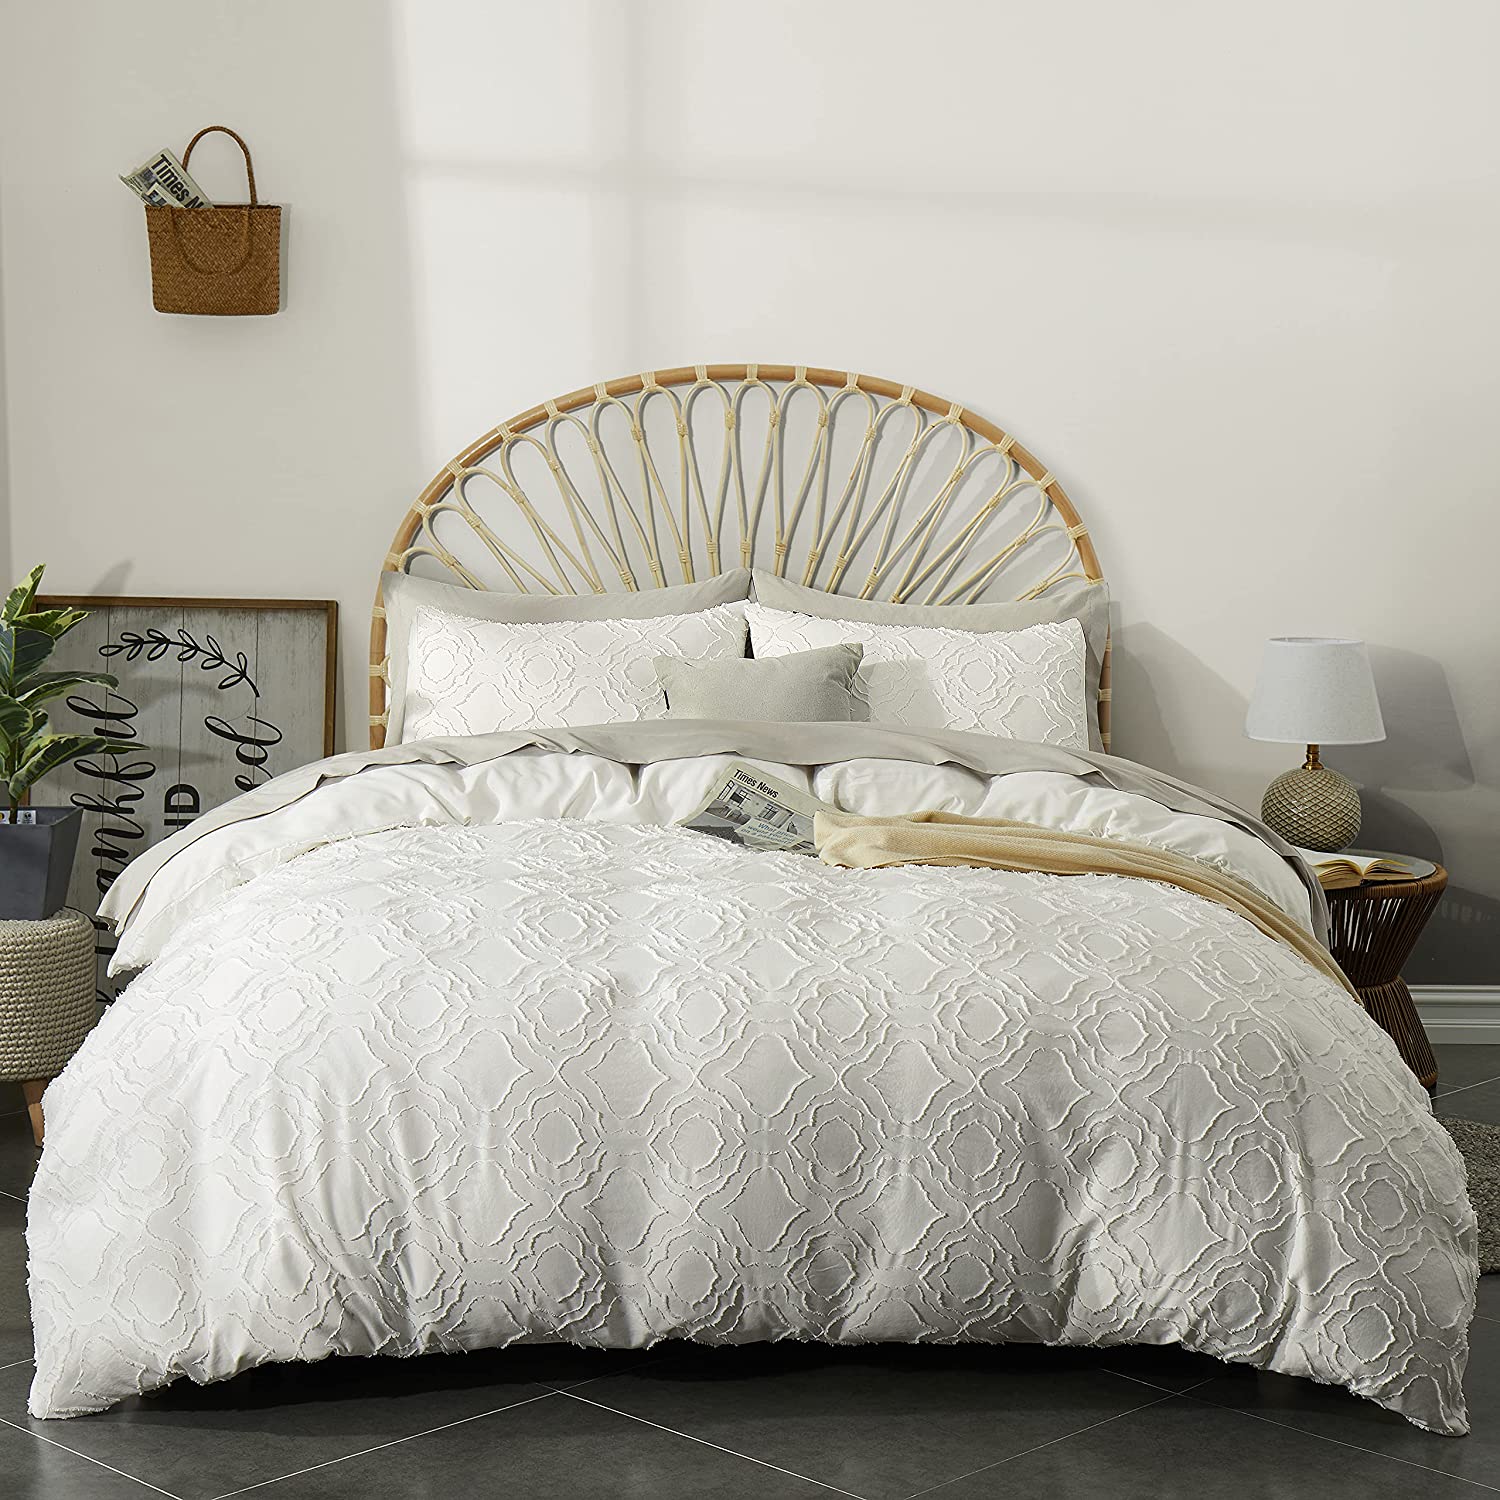 Price:$40.99  Duvet Cover King Size, 3 Pieces Tufted Comforter Cover Set, Soft and Embroidery Shabby Chic Boho Bedding Sets for All Seasons, White : Home & Kitchen